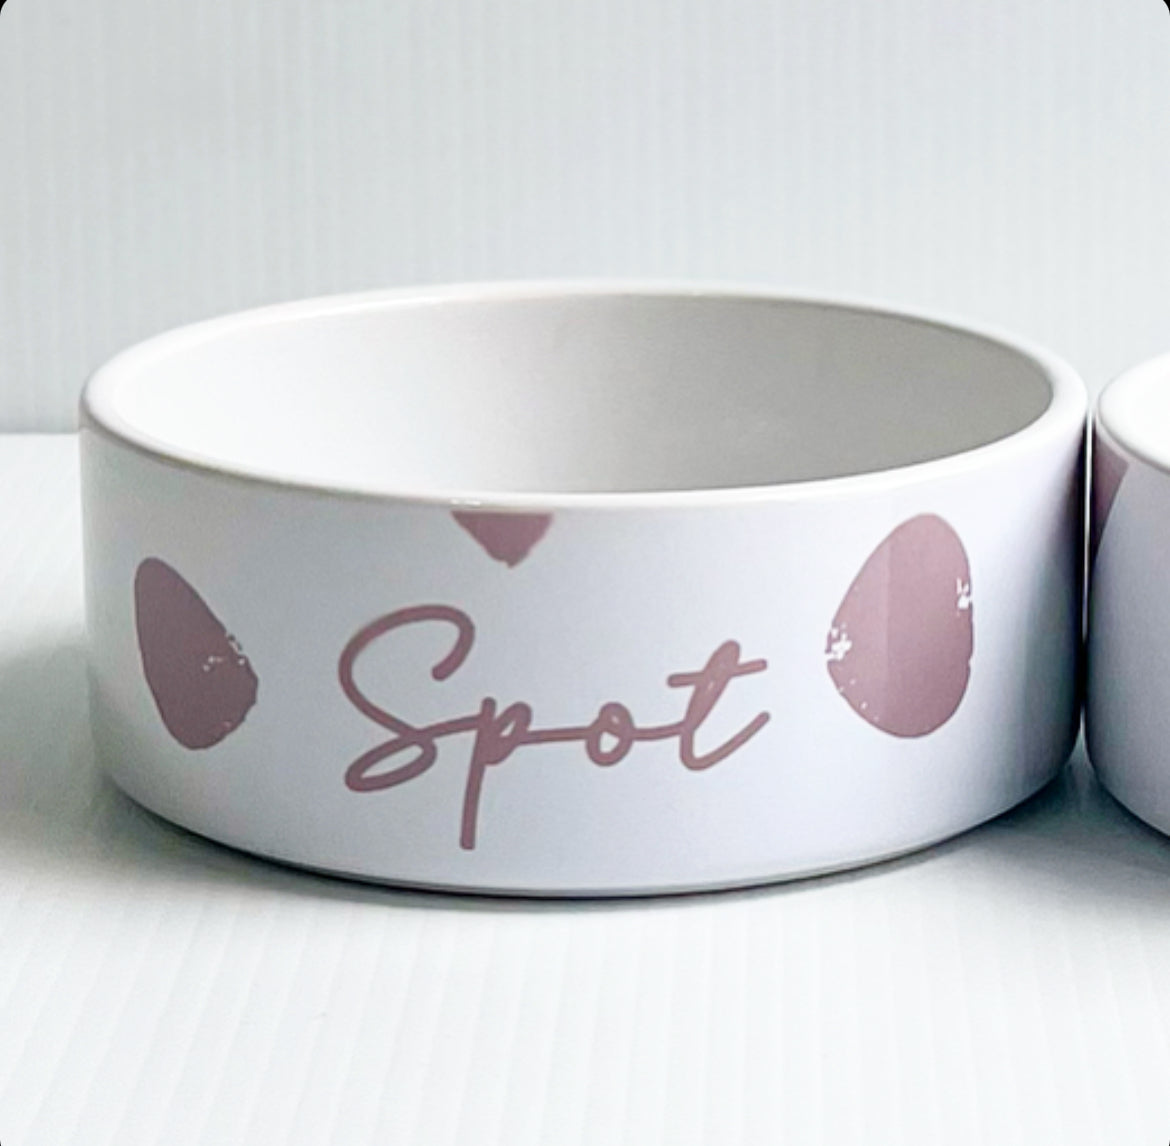 Ceramic personalised Pet Bowl - Add your pets name - 2 sizes